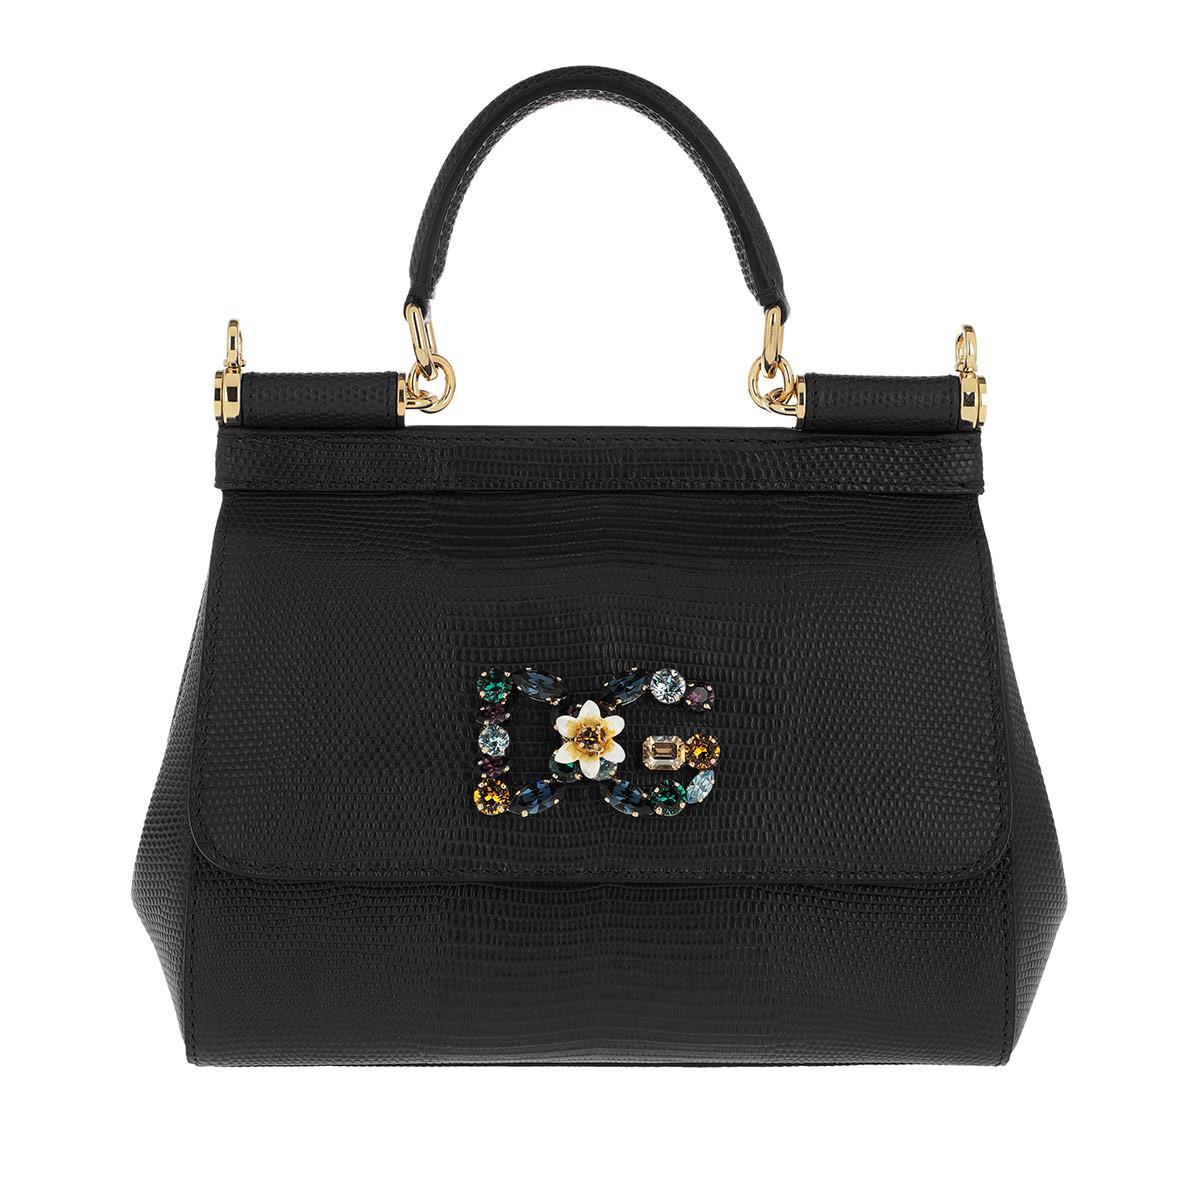 Dolce & Gabbana Sicily Small Tote Leather Black at FORZIERI